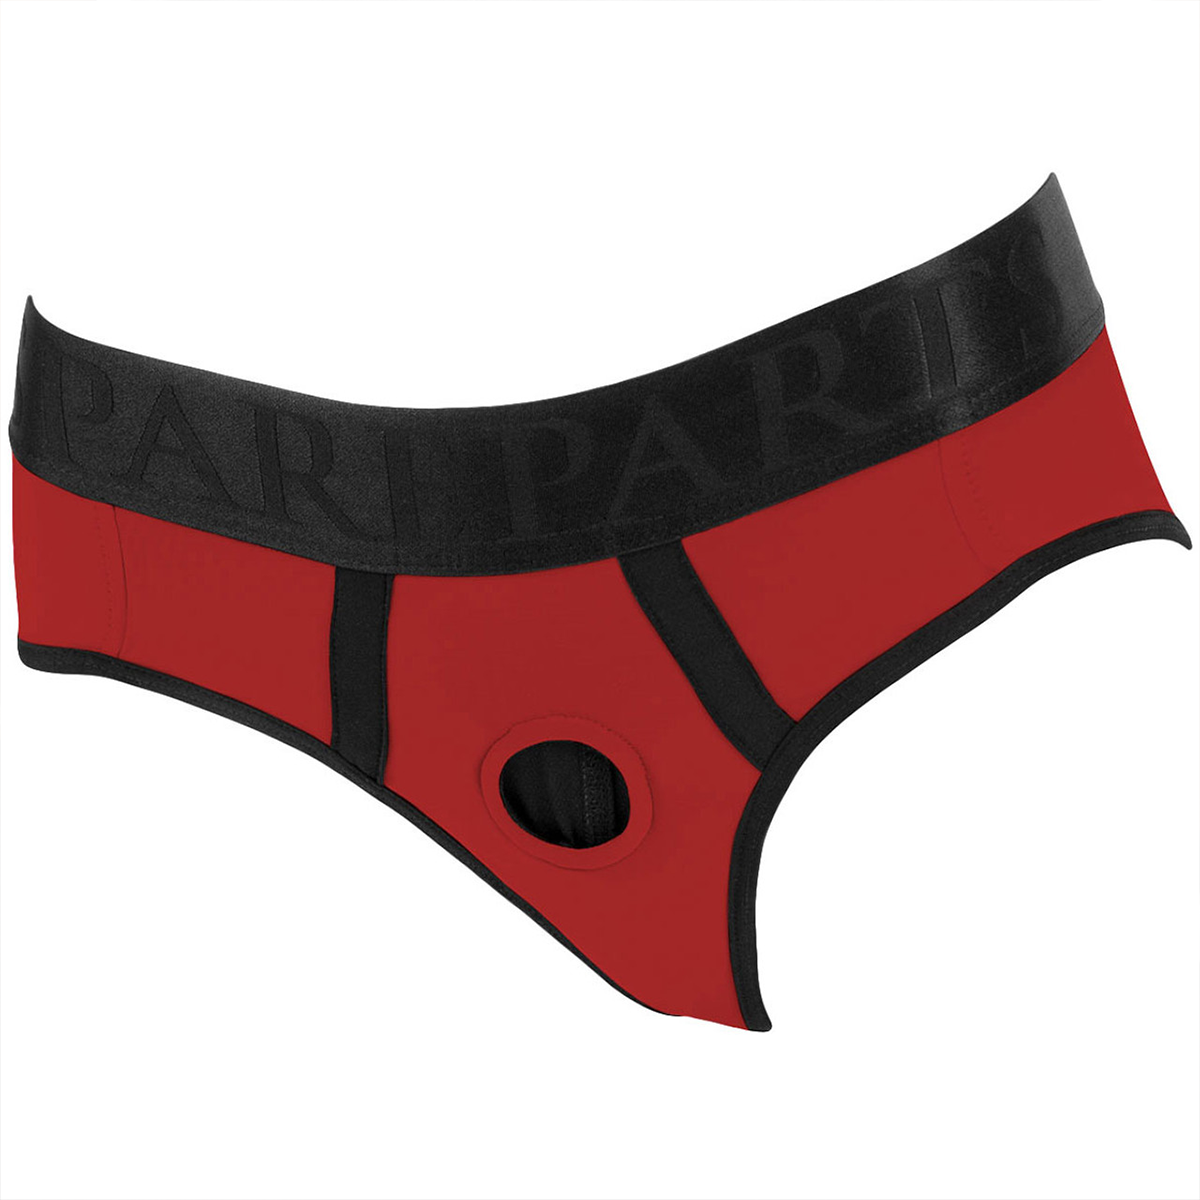 Tomboi Brief Harness by Spareparts – As You Like It